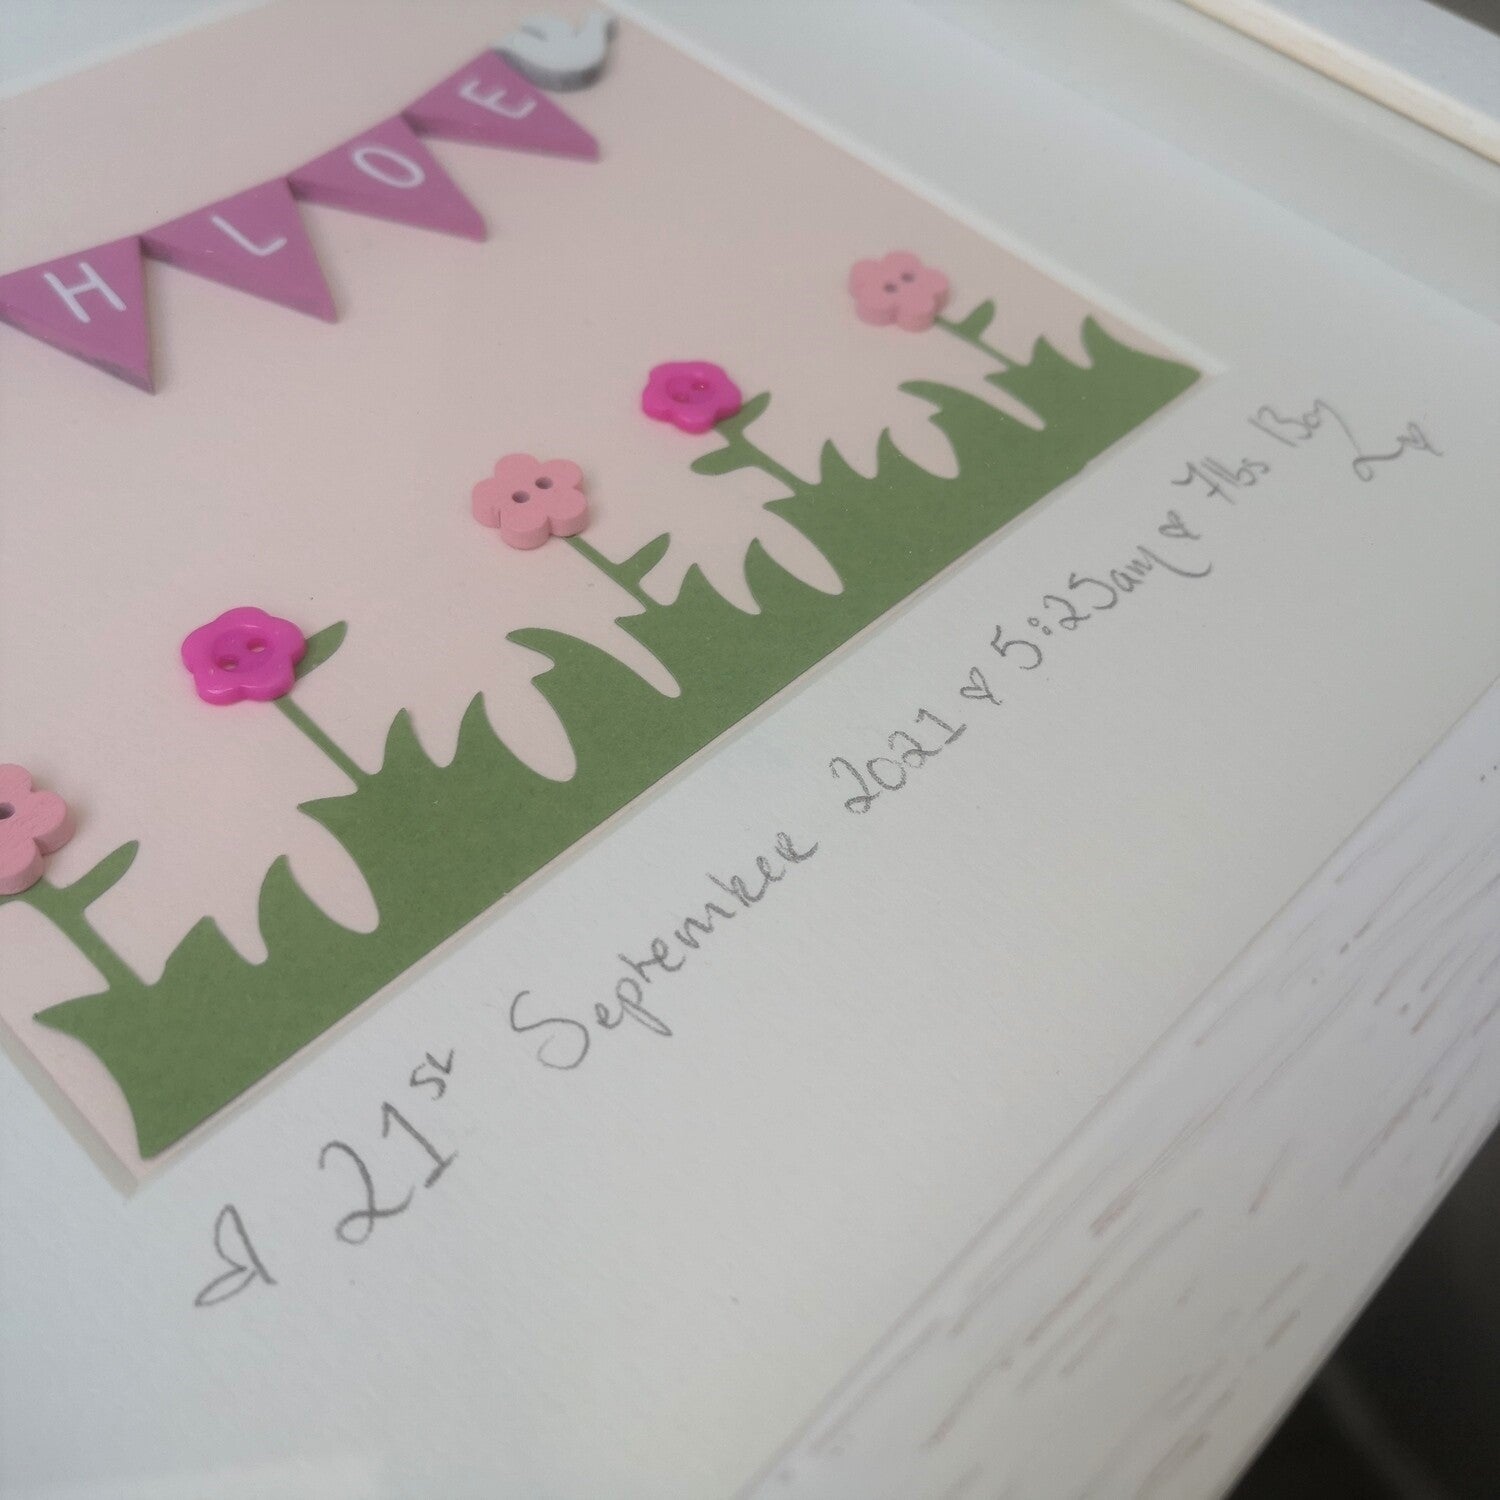 Hand-painted pink wooden bunting and doves, over papercut flowers embellished with buttons, on a pastel pink background,  in a handmade 25x25cm deep box wooden frame.